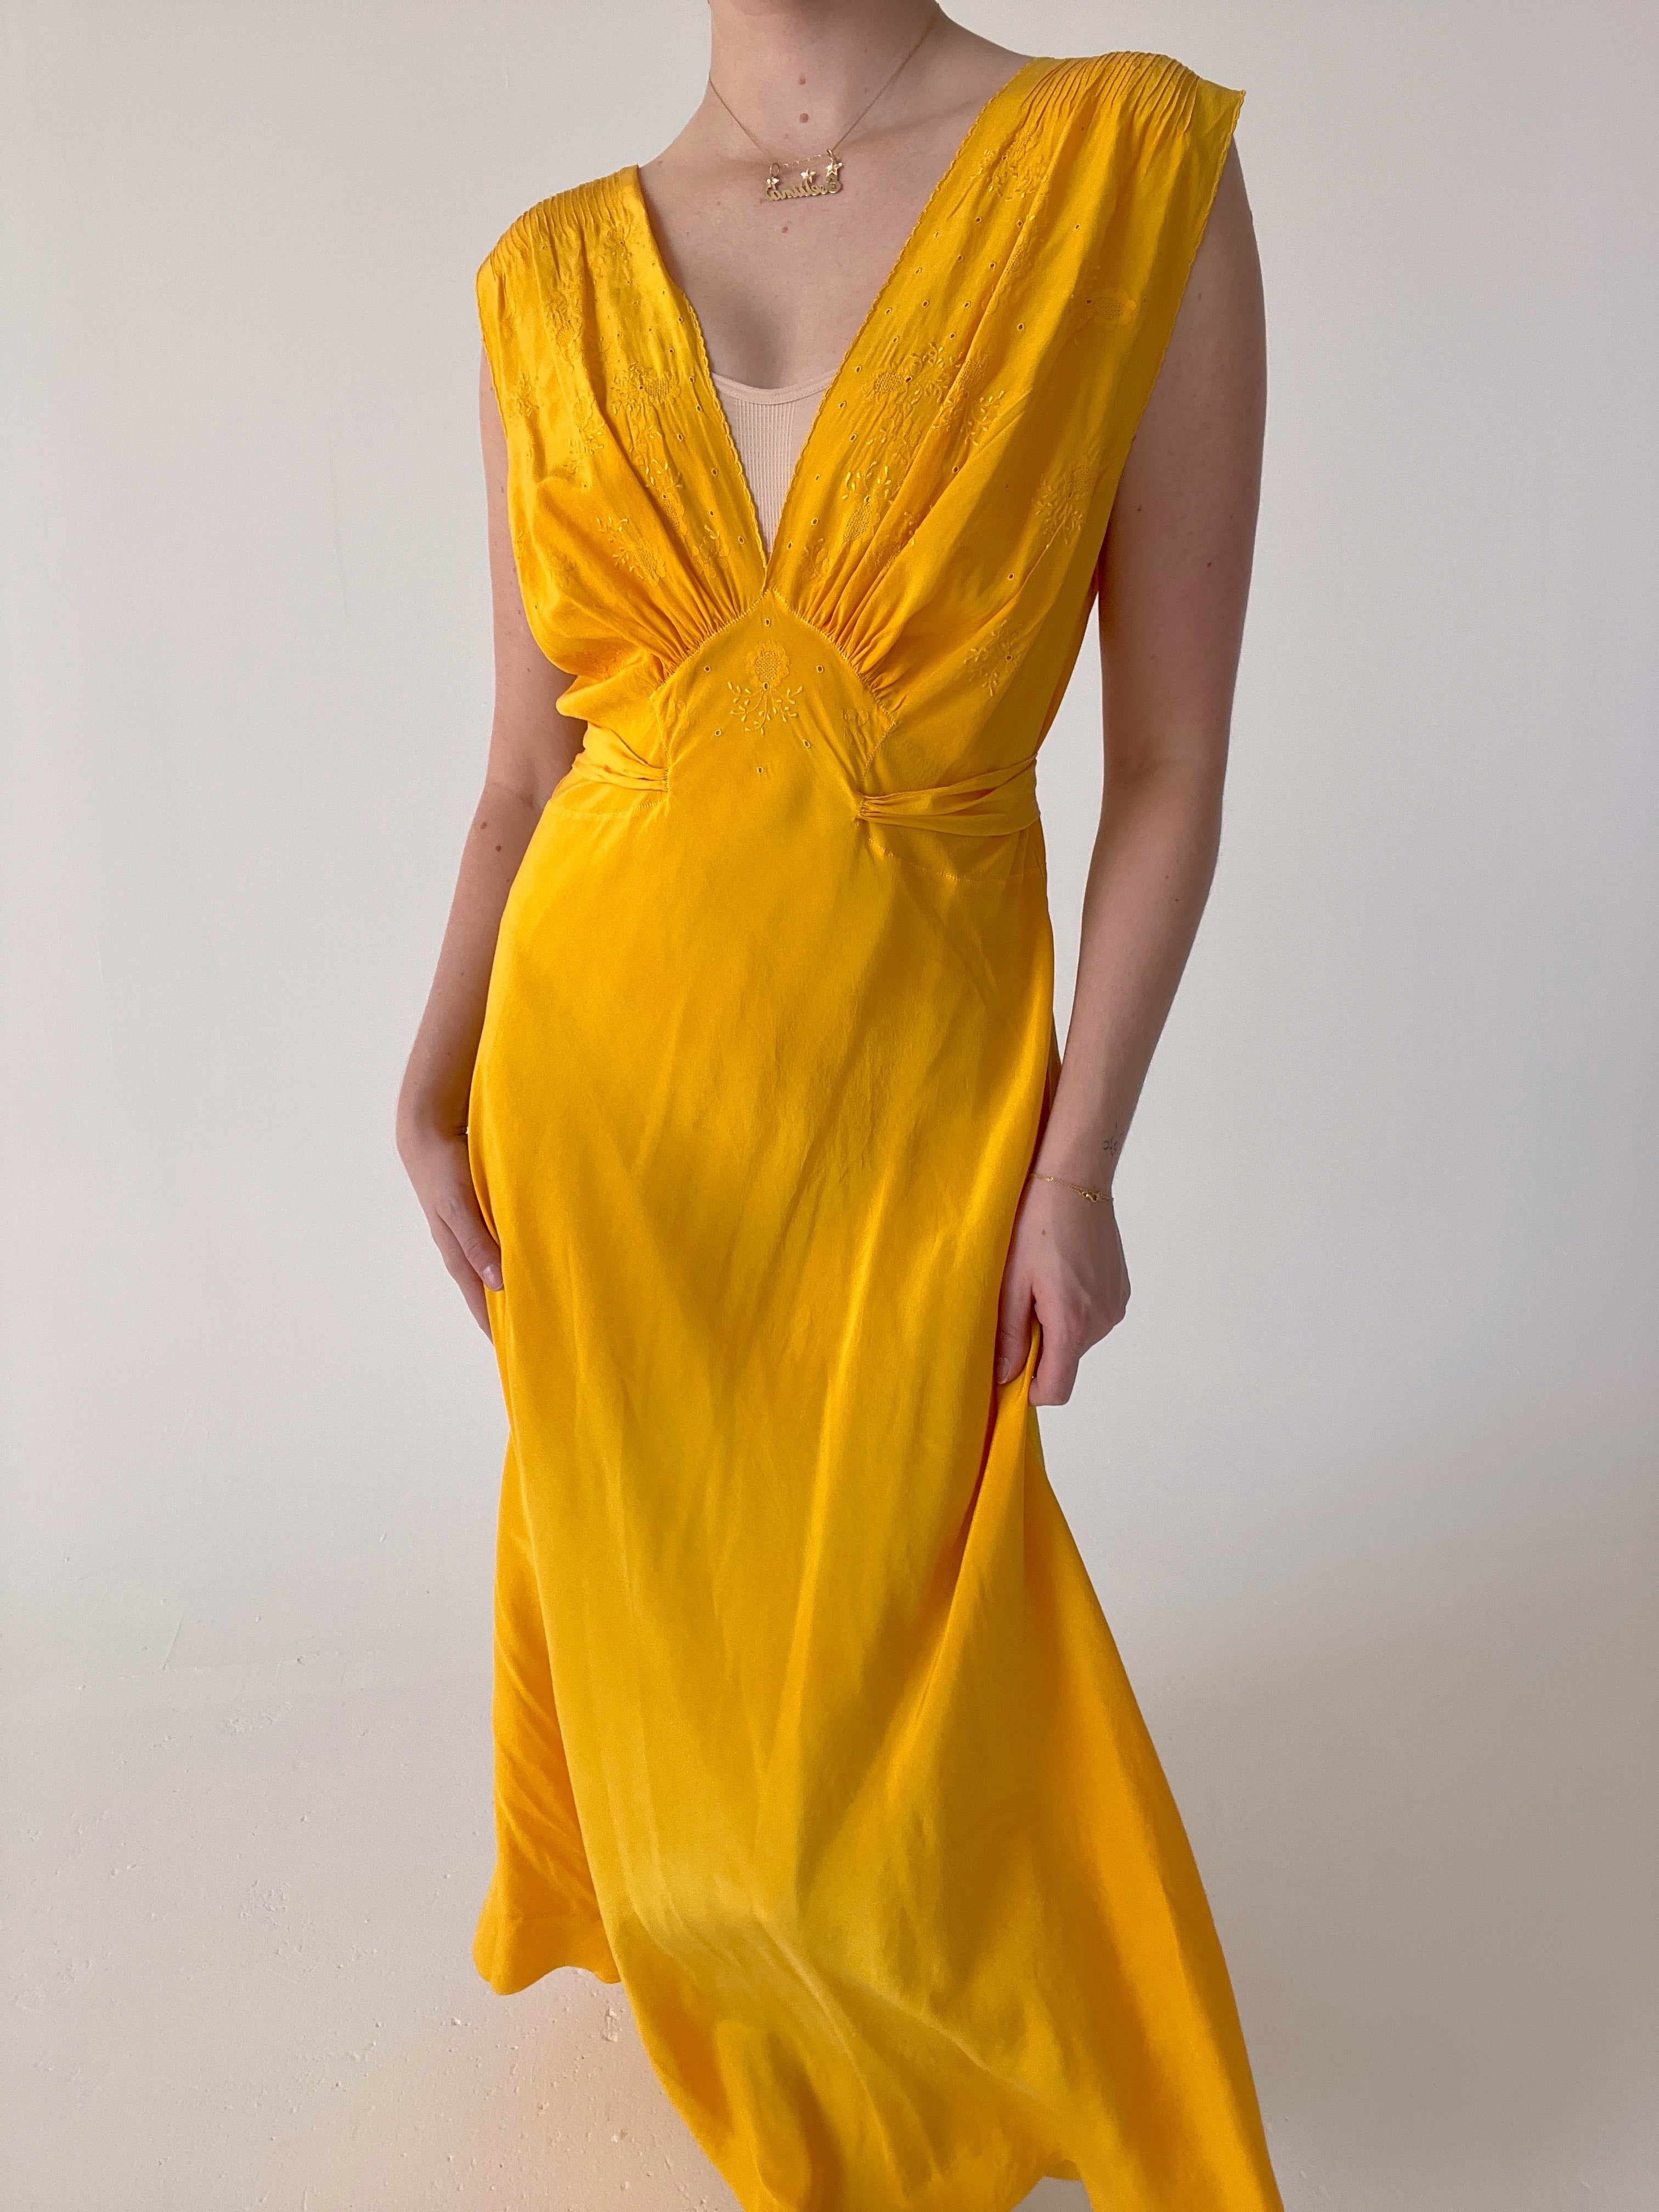 Hand Dyed Marigold Silk Dress with Floral Embroidery